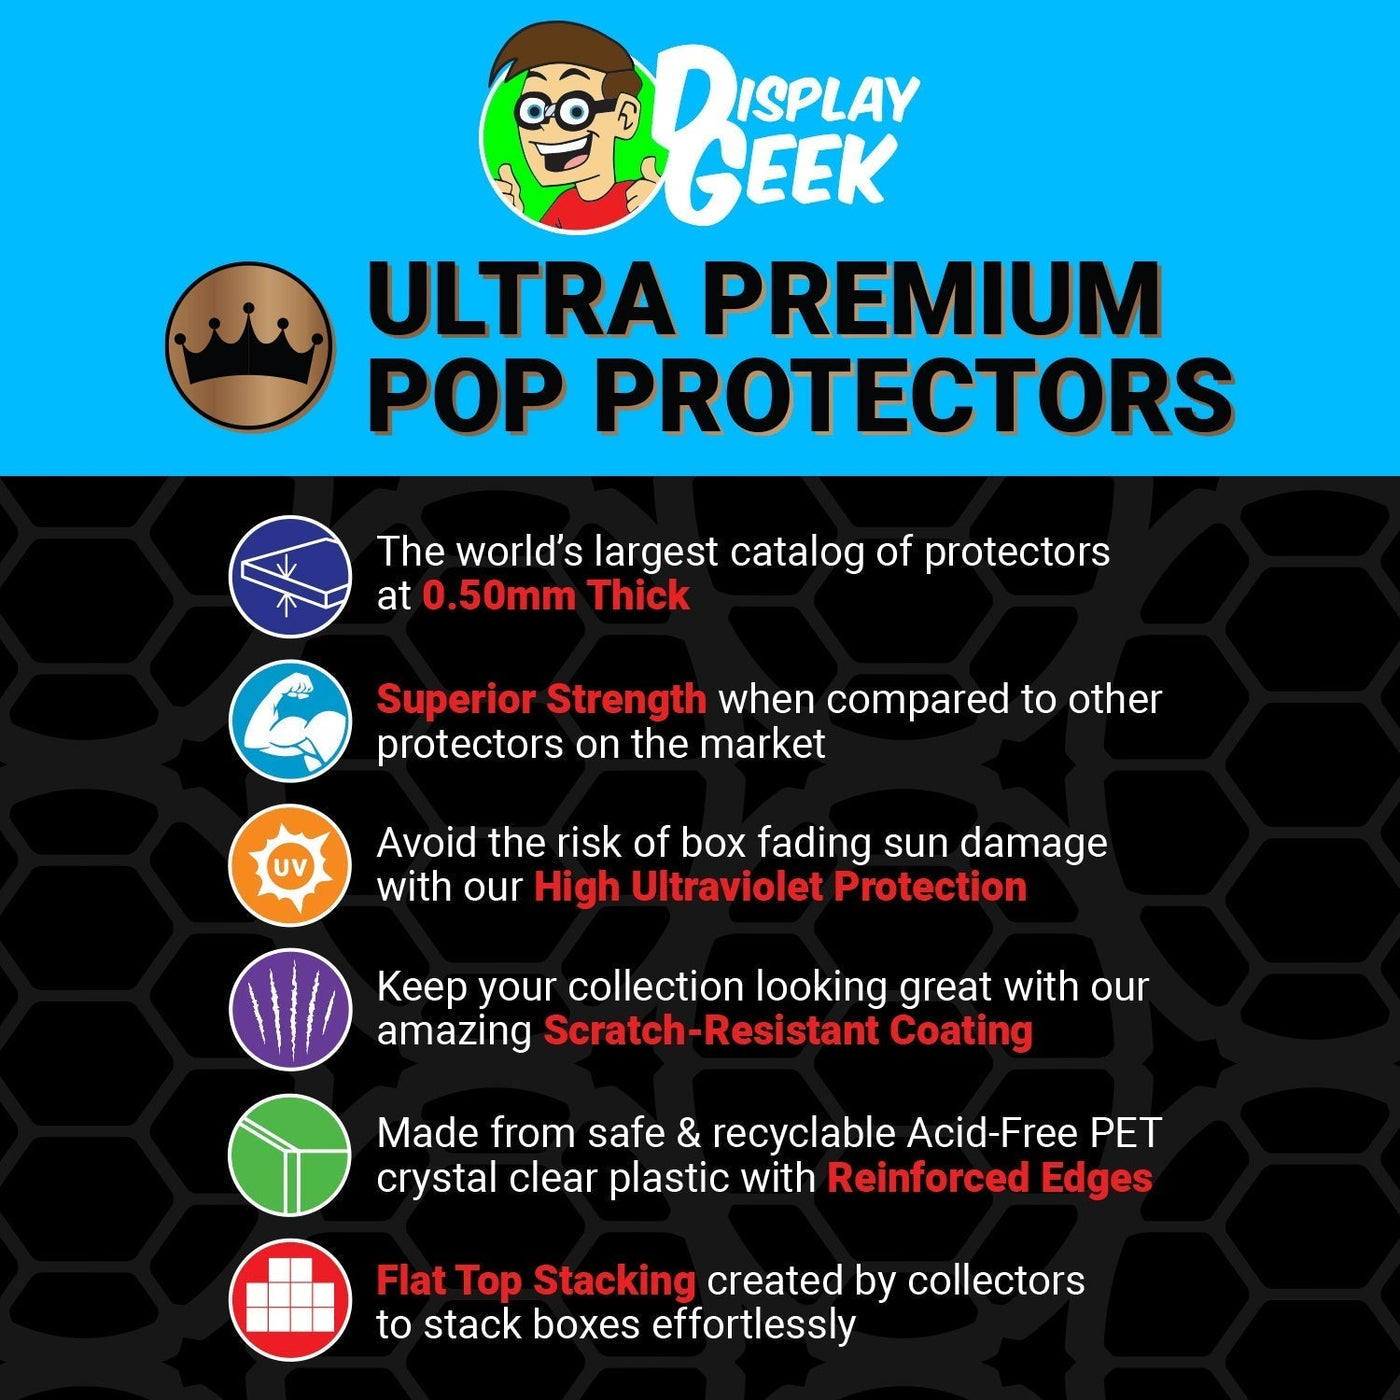 Pop Protector for 2 Pack Sorcerer Mickey & Chernabog Metallic SDCC Funko Pop on The Protector Guide App by Display Geek